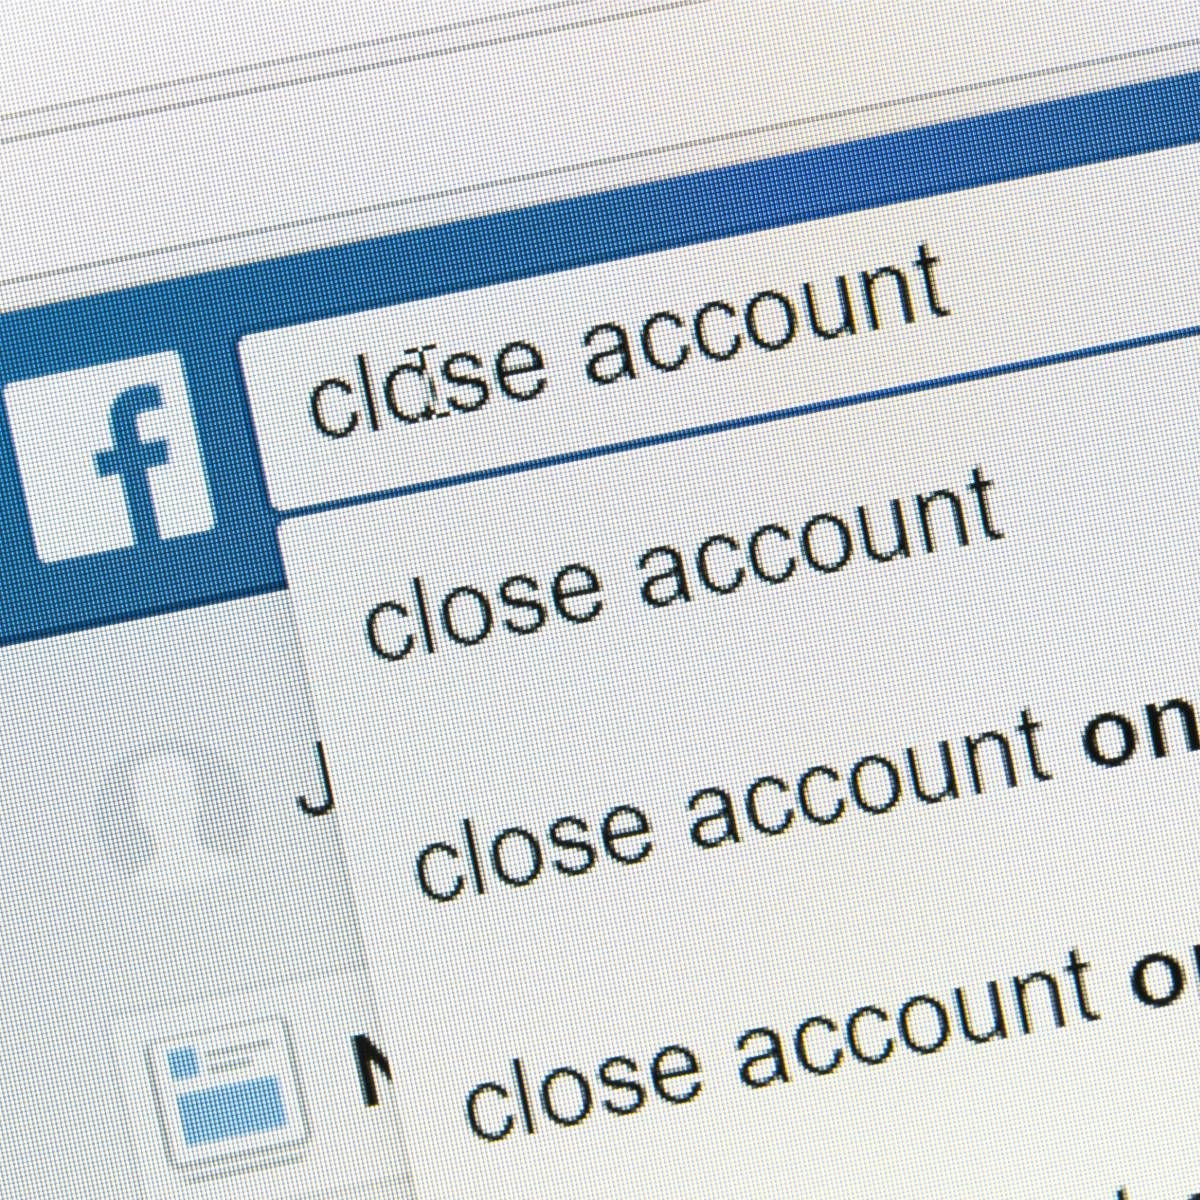 A Facebook search for how to close the account. 